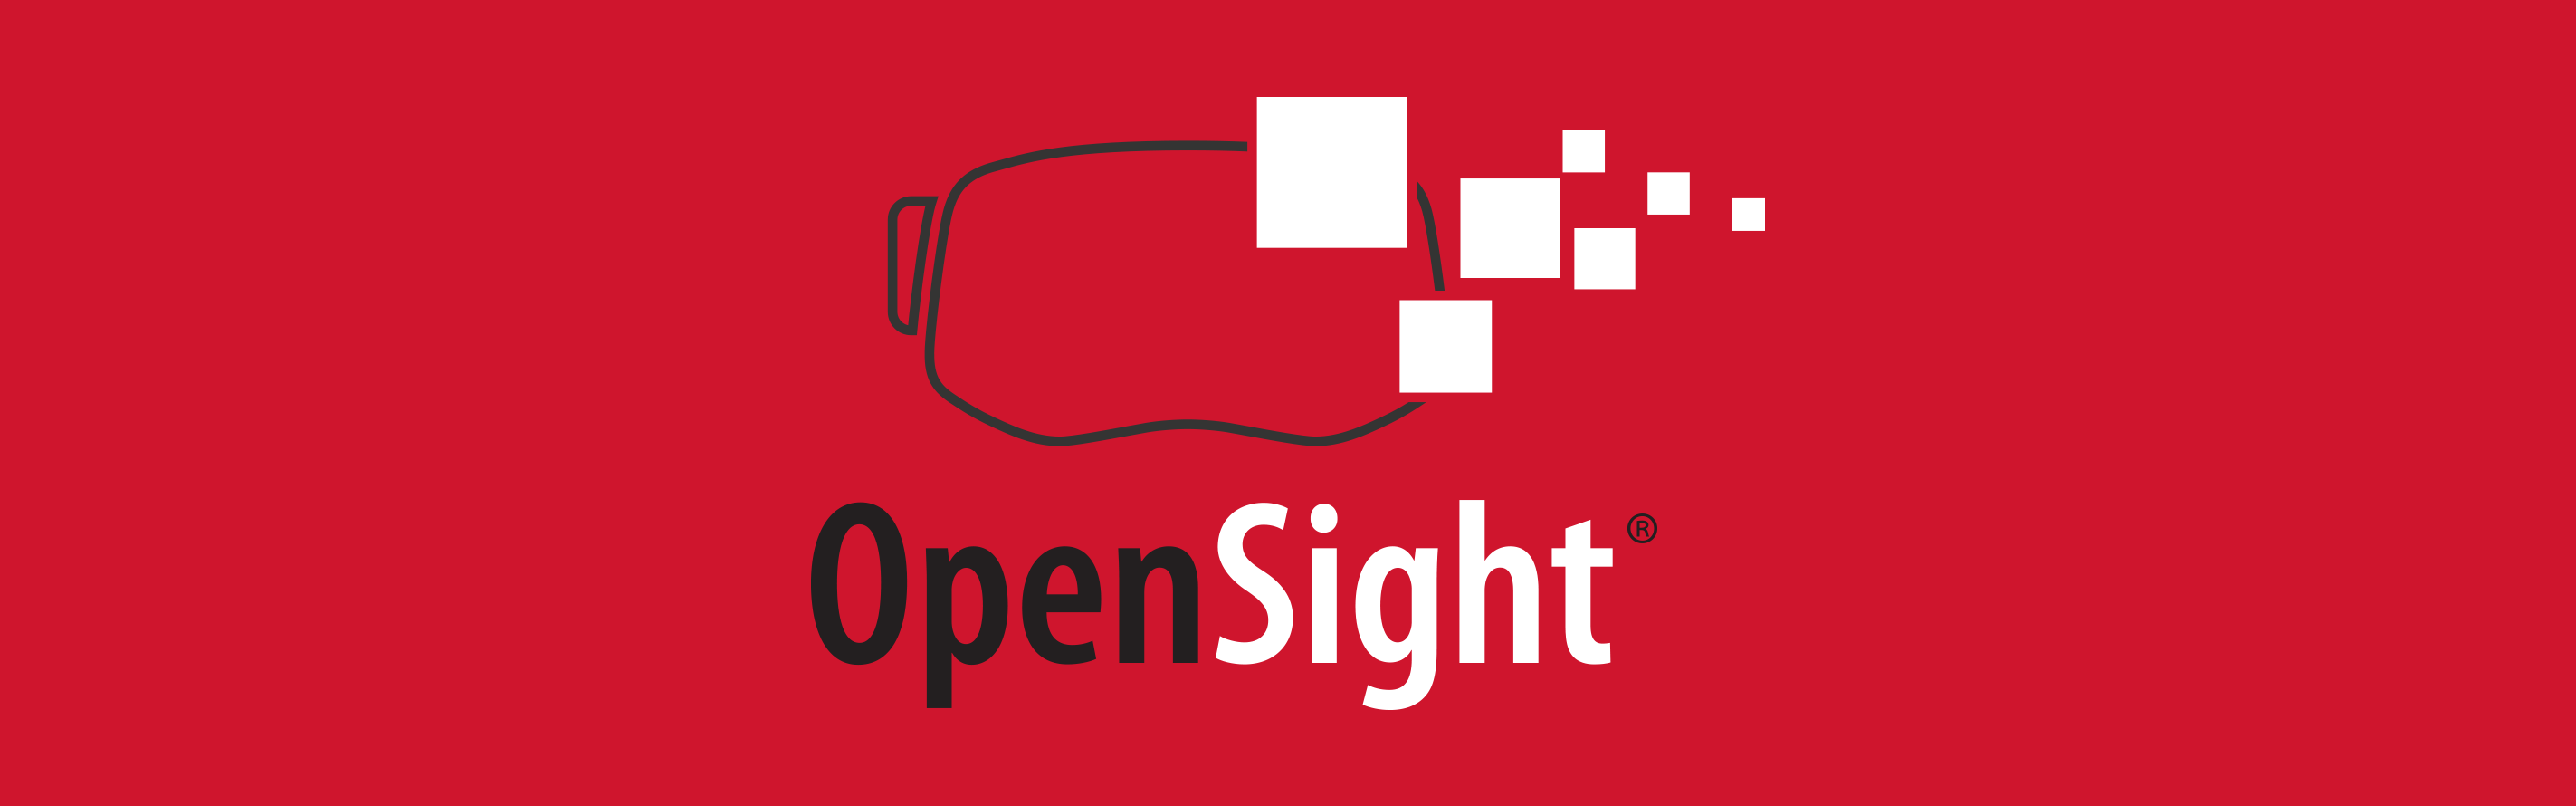 Opensight Augmented Reality System